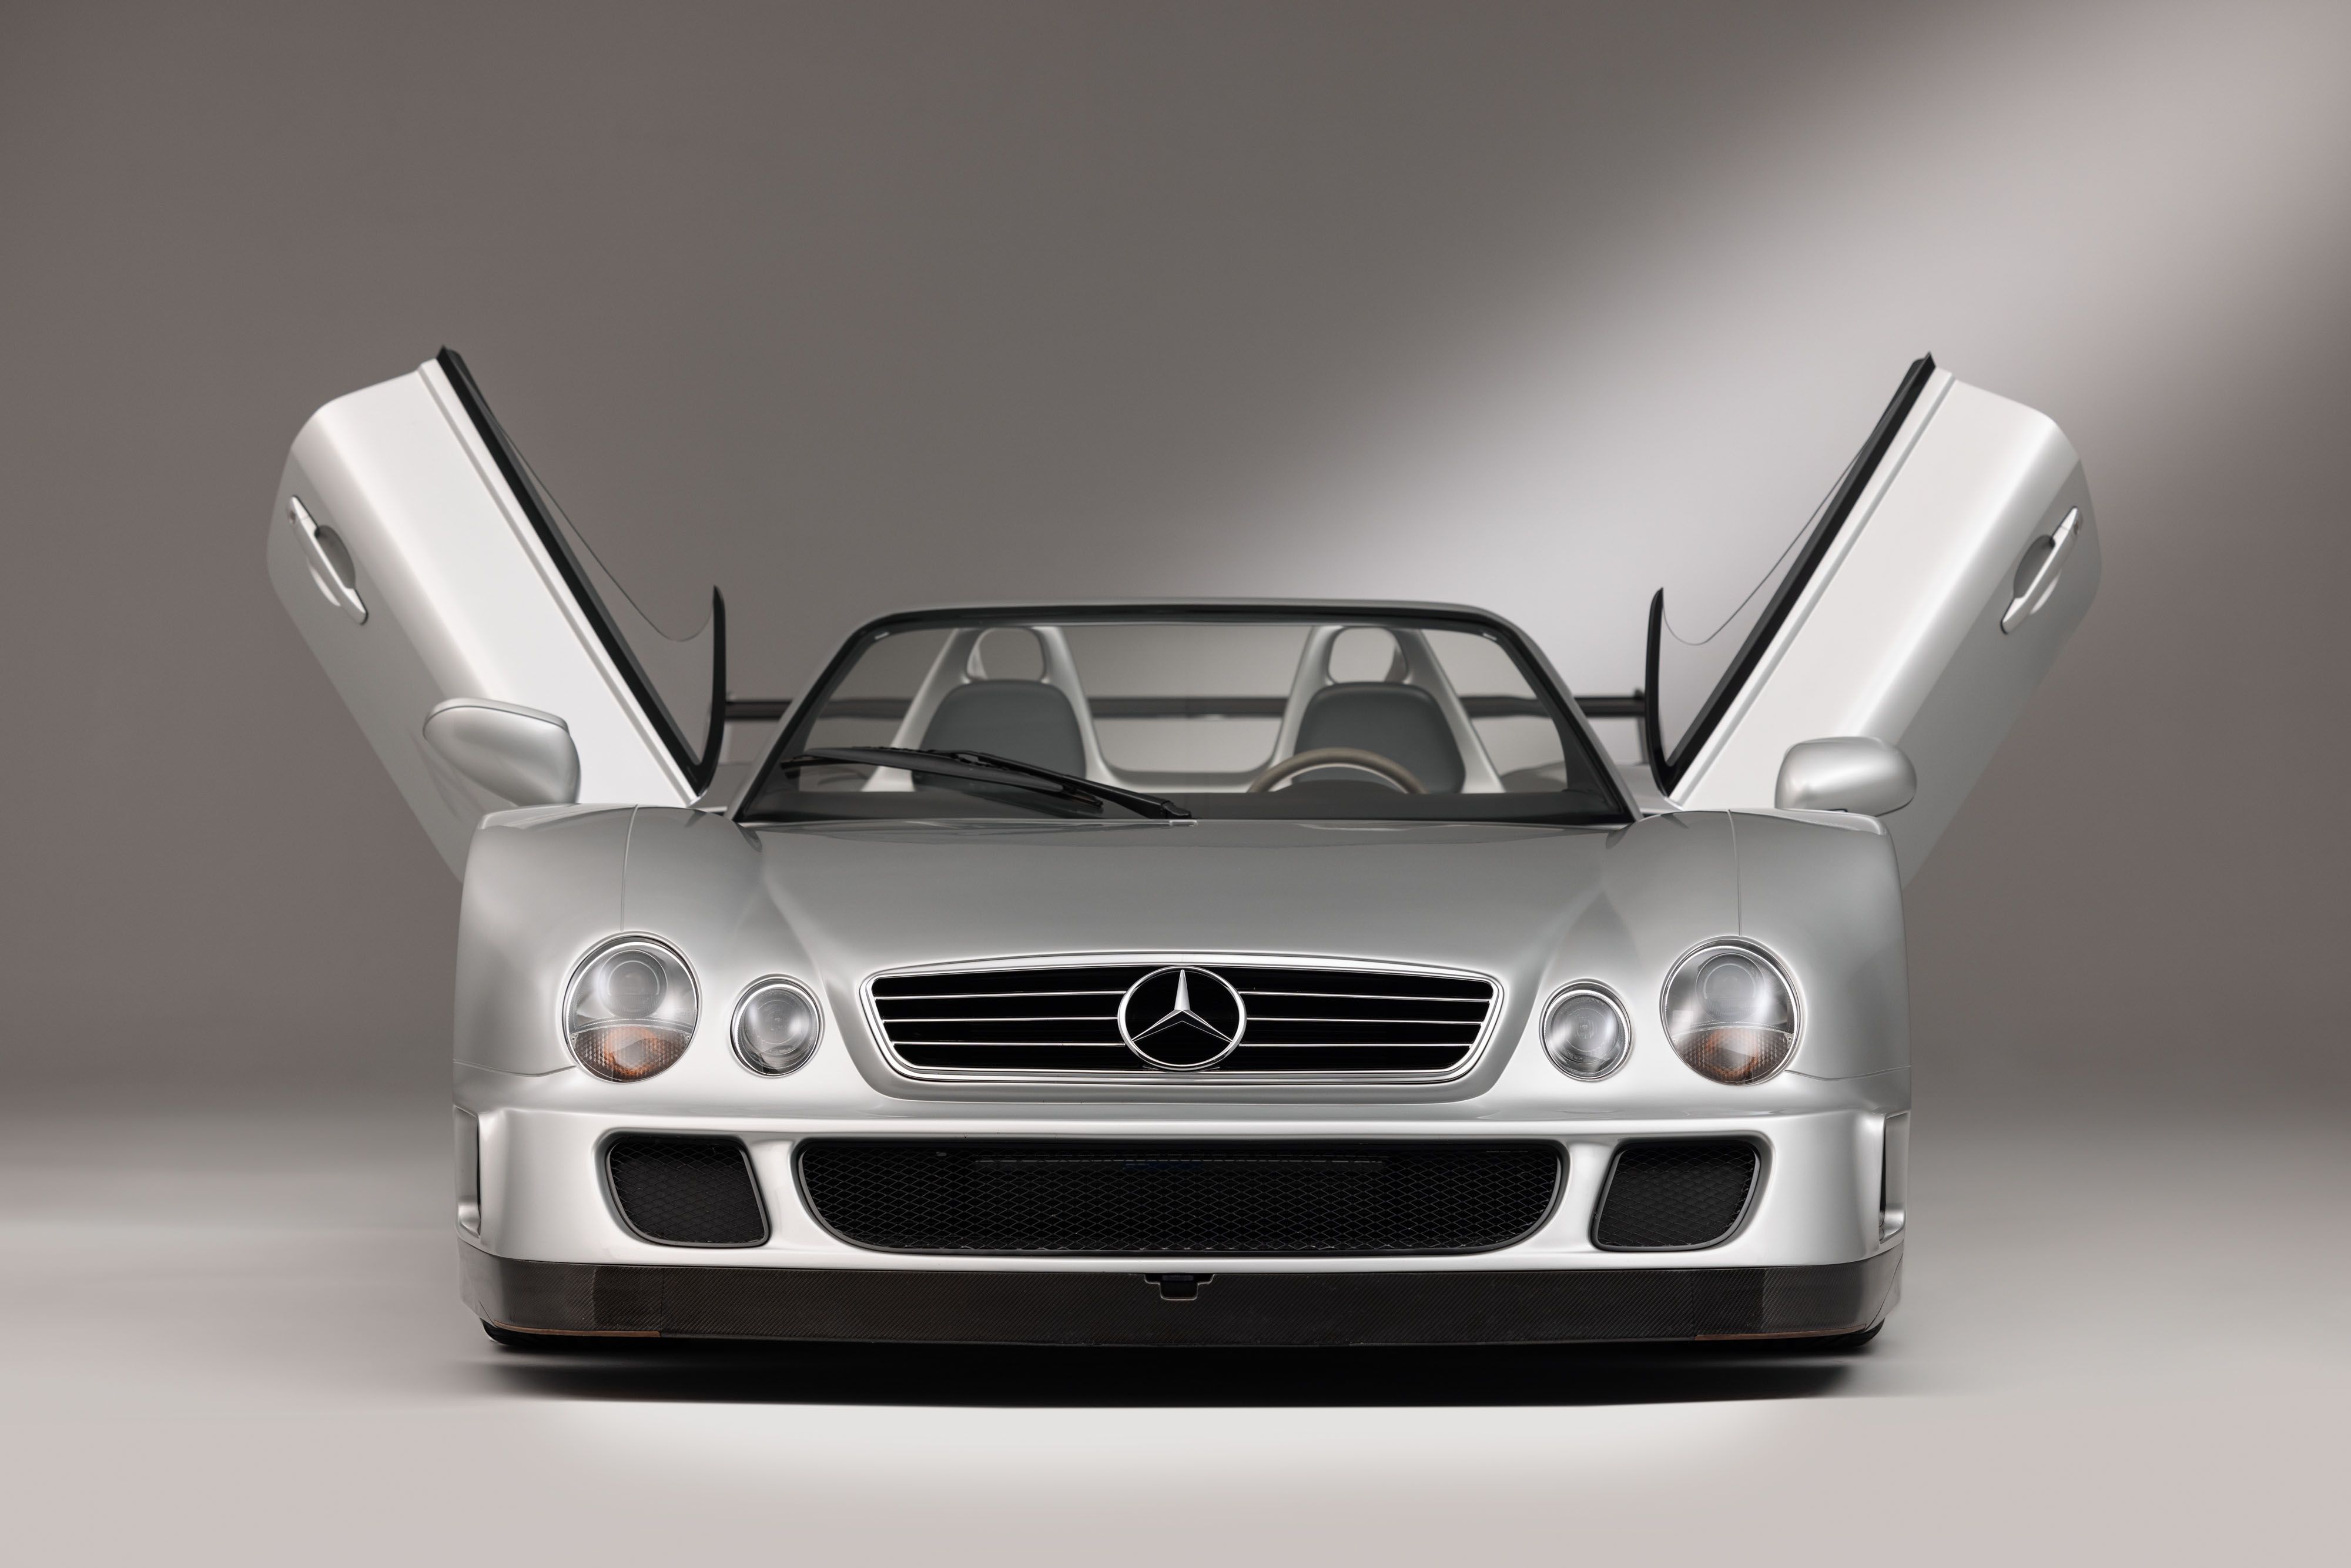 Buy This Mercedes-Benz CLK GTR and Live Out Your GT1 Dreams